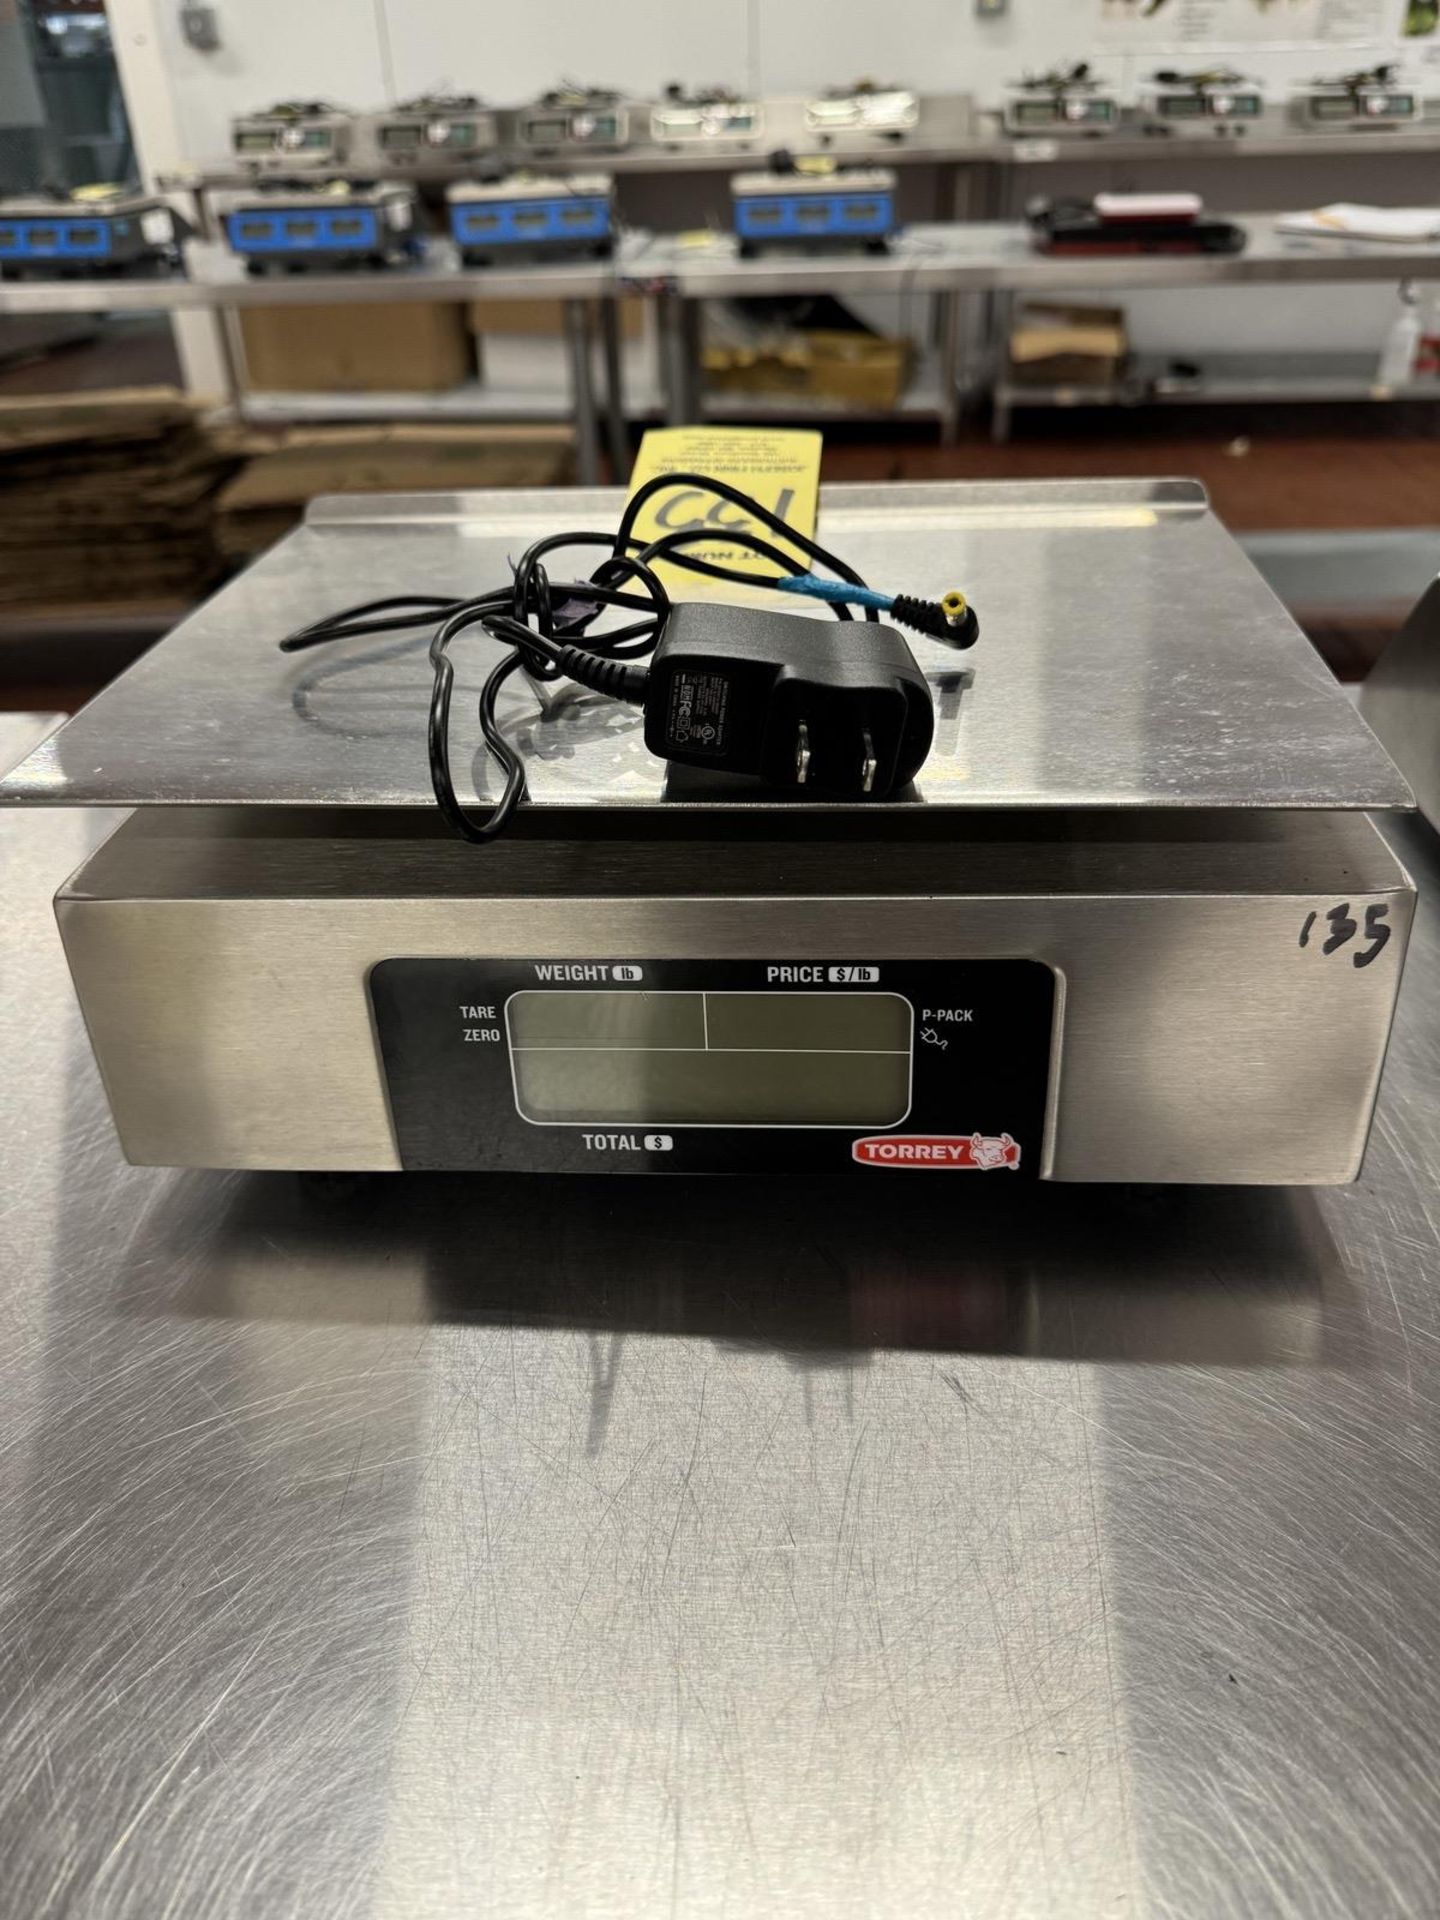 Torrey Commercial Digital Scale, 40 Lb. Capacity - Image 2 of 2